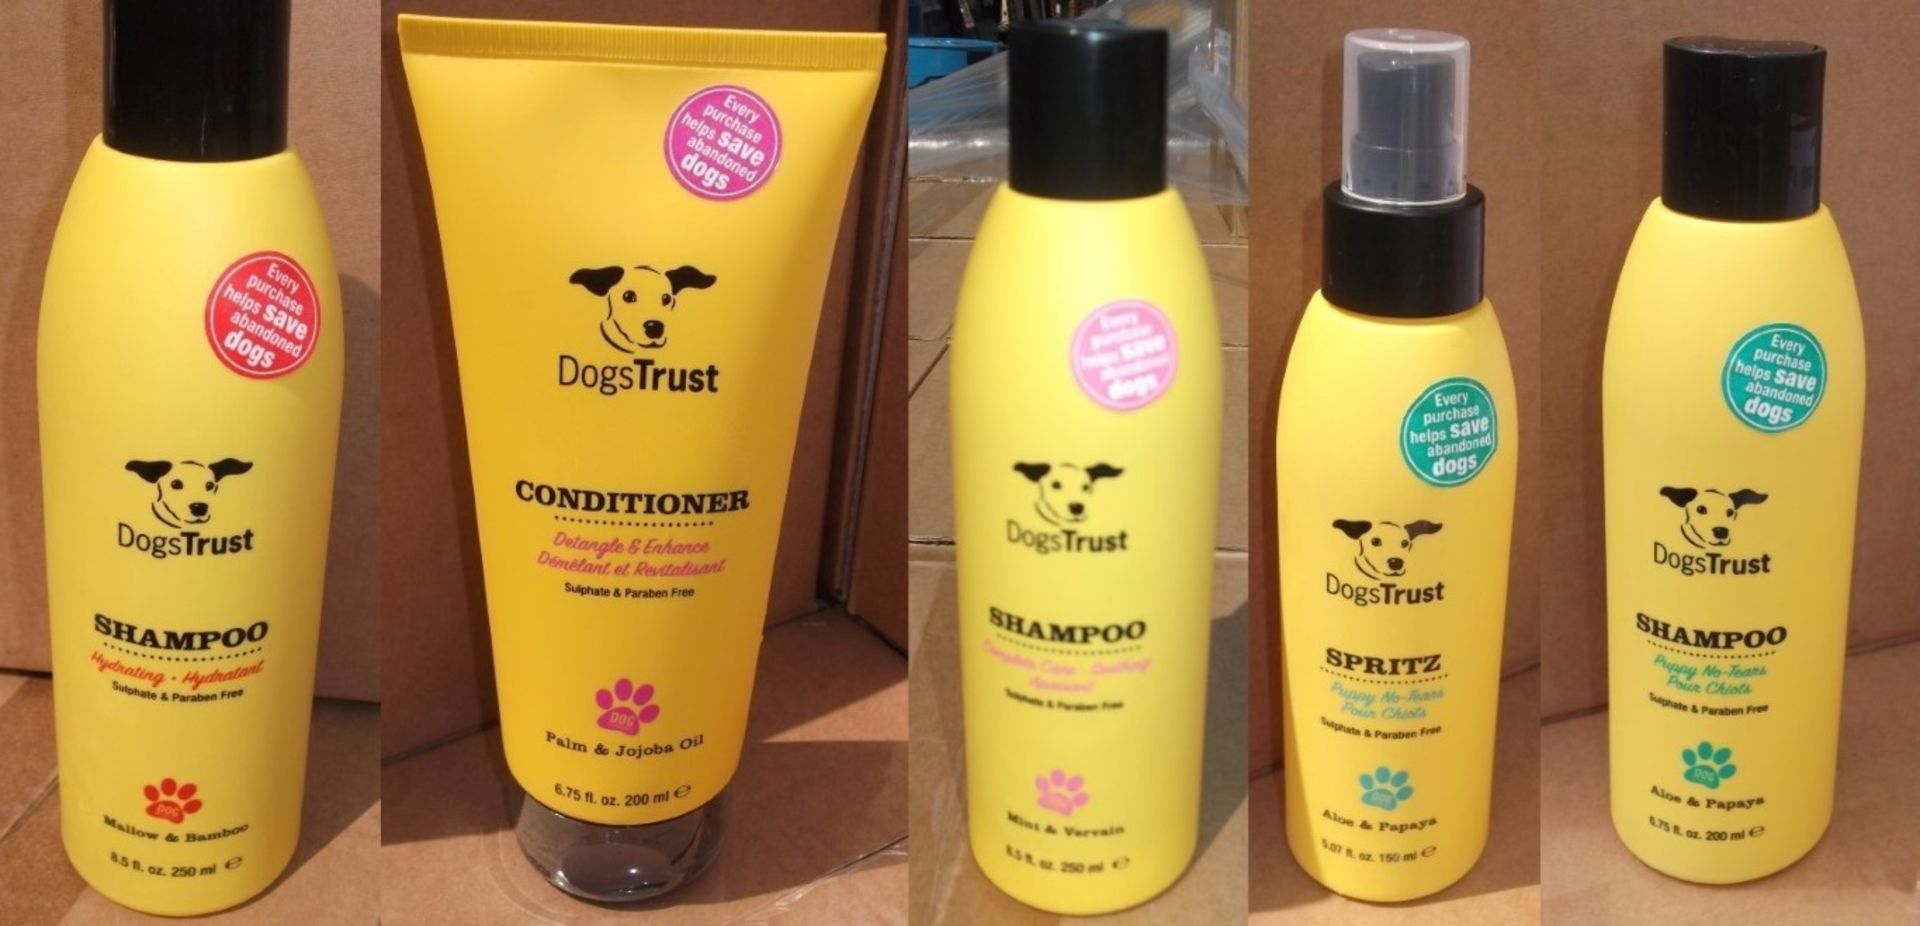 60 x Various Dogs Trust Shampoos and Conditioners - Brand New Stock - CL028 - Includes No Tears,